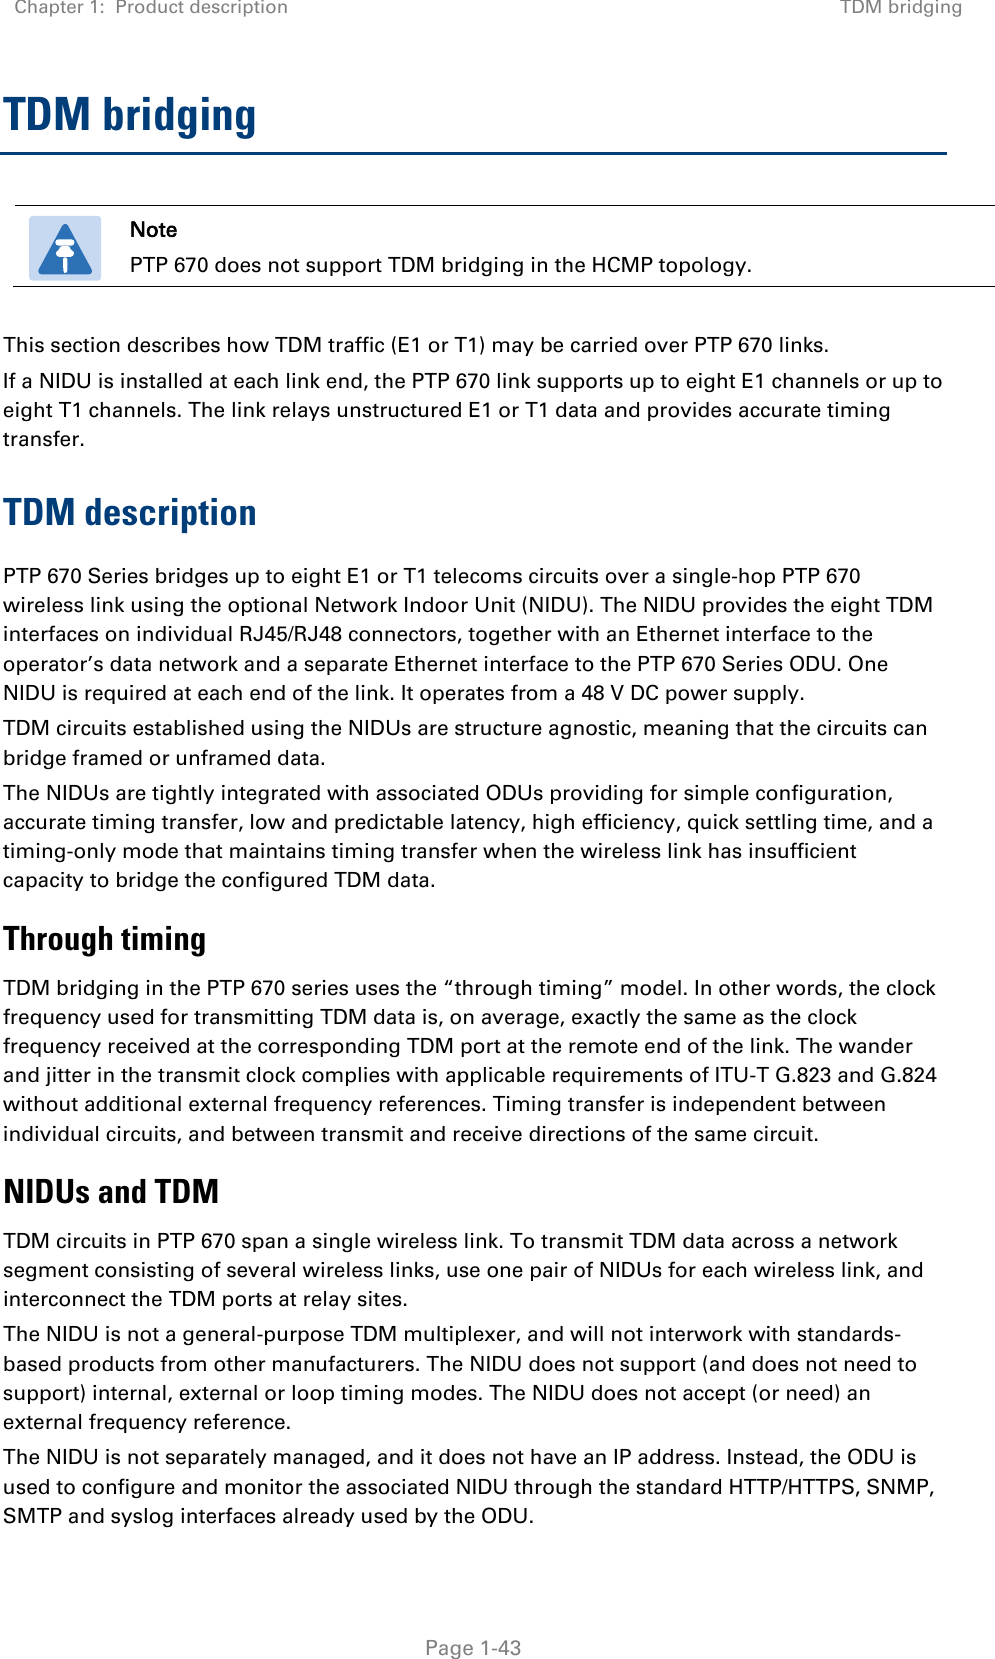 Chapter 1:  Product description TDM bridging   Page 1-43 TDM bridging  Note PTP 670 does not support TDM bridging in the HCMP topology.  This section describes how TDM traffic (E1 or T1) may be carried over PTP 670 links. If a NIDU is installed at each link end, the PTP 670 link supports up to eight E1 channels or up to eight T1 channels. The link relays unstructured E1 or T1 data and provides accurate timing transfer. TDM description PTP 670 Series bridges up to eight E1 or T1 telecoms circuits over a single-hop PTP 670 wireless link using the optional Network Indoor Unit (NIDU). The NIDU provides the eight TDM interfaces on individual RJ45/RJ48 connectors, together with an Ethernet interface to the operator’s data network and a separate Ethernet interface to the PTP 670 Series ODU. One NIDU is required at each end of the link. It operates from a 48 V DC power supply. TDM circuits established using the NIDUs are structure agnostic, meaning that the circuits can bridge framed or unframed data. The NIDUs are tightly integrated with associated ODUs providing for simple configuration, accurate timing transfer, low and predictable latency, high efficiency, quick settling time, and a timing-only mode that maintains timing transfer when the wireless link has insufficient capacity to bridge the configured TDM data. Through timing TDM bridging in the PTP 670 series uses the “through timing” model. In other words, the clock frequency used for transmitting TDM data is, on average, exactly the same as the clock frequency received at the corresponding TDM port at the remote end of the link. The wander and jitter in the transmit clock complies with applicable requirements of ITU-T G.823 and G.824 without additional external frequency references. Timing transfer is independent between individual circuits, and between transmit and receive directions of the same circuit. NIDUs and TDM TDM circuits in PTP 670 span a single wireless link. To transmit TDM data across a network segment consisting of several wireless links, use one pair of NIDUs for each wireless link, and interconnect the TDM ports at relay sites. The NIDU is not a general-purpose TDM multiplexer, and will not interwork with standards-based products from other manufacturers. The NIDU does not support (and does not need to support) internal, external or loop timing modes. The NIDU does not accept (or need) an external frequency reference. The NIDU is not separately managed, and it does not have an IP address. Instead, the ODU is used to configure and monitor the associated NIDU through the standard HTTP/HTTPS, SNMP, SMTP and syslog interfaces already used by the ODU. 